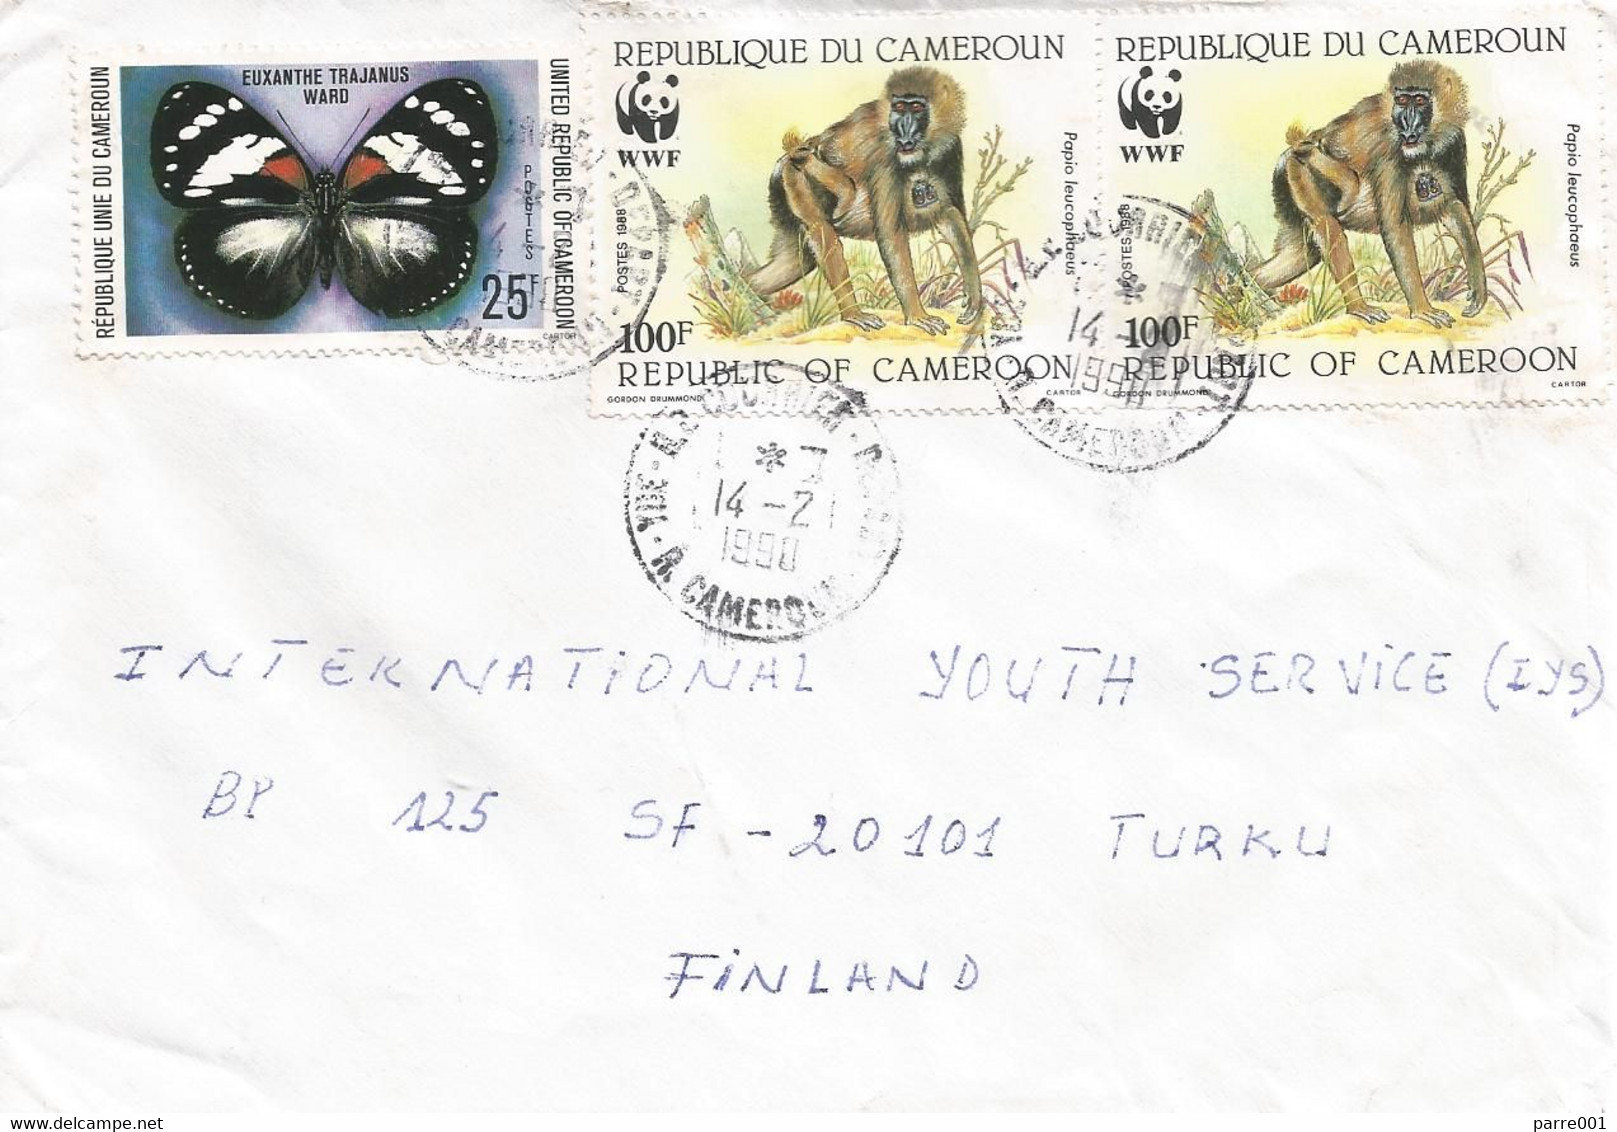 Cameroon Cameroun 1990 Yaounde WWF Drill Ape Monkey Trajan's Forest Queen Euxanthe Trajanus Butterfly Cover - Covers & Documents